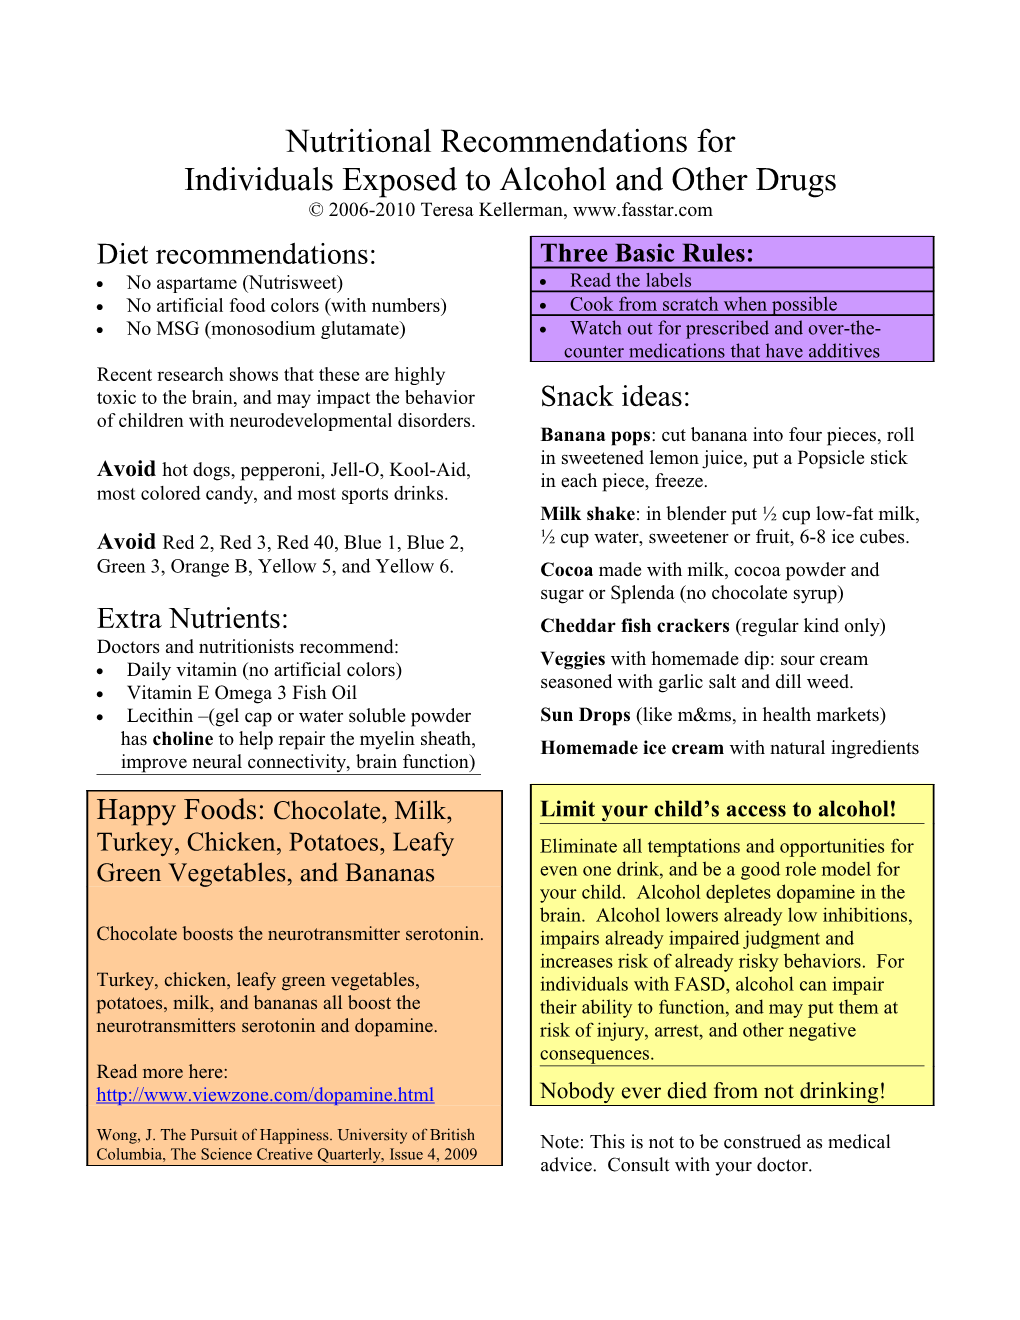 Individuals Exposed to Alcohol and Other Drugs